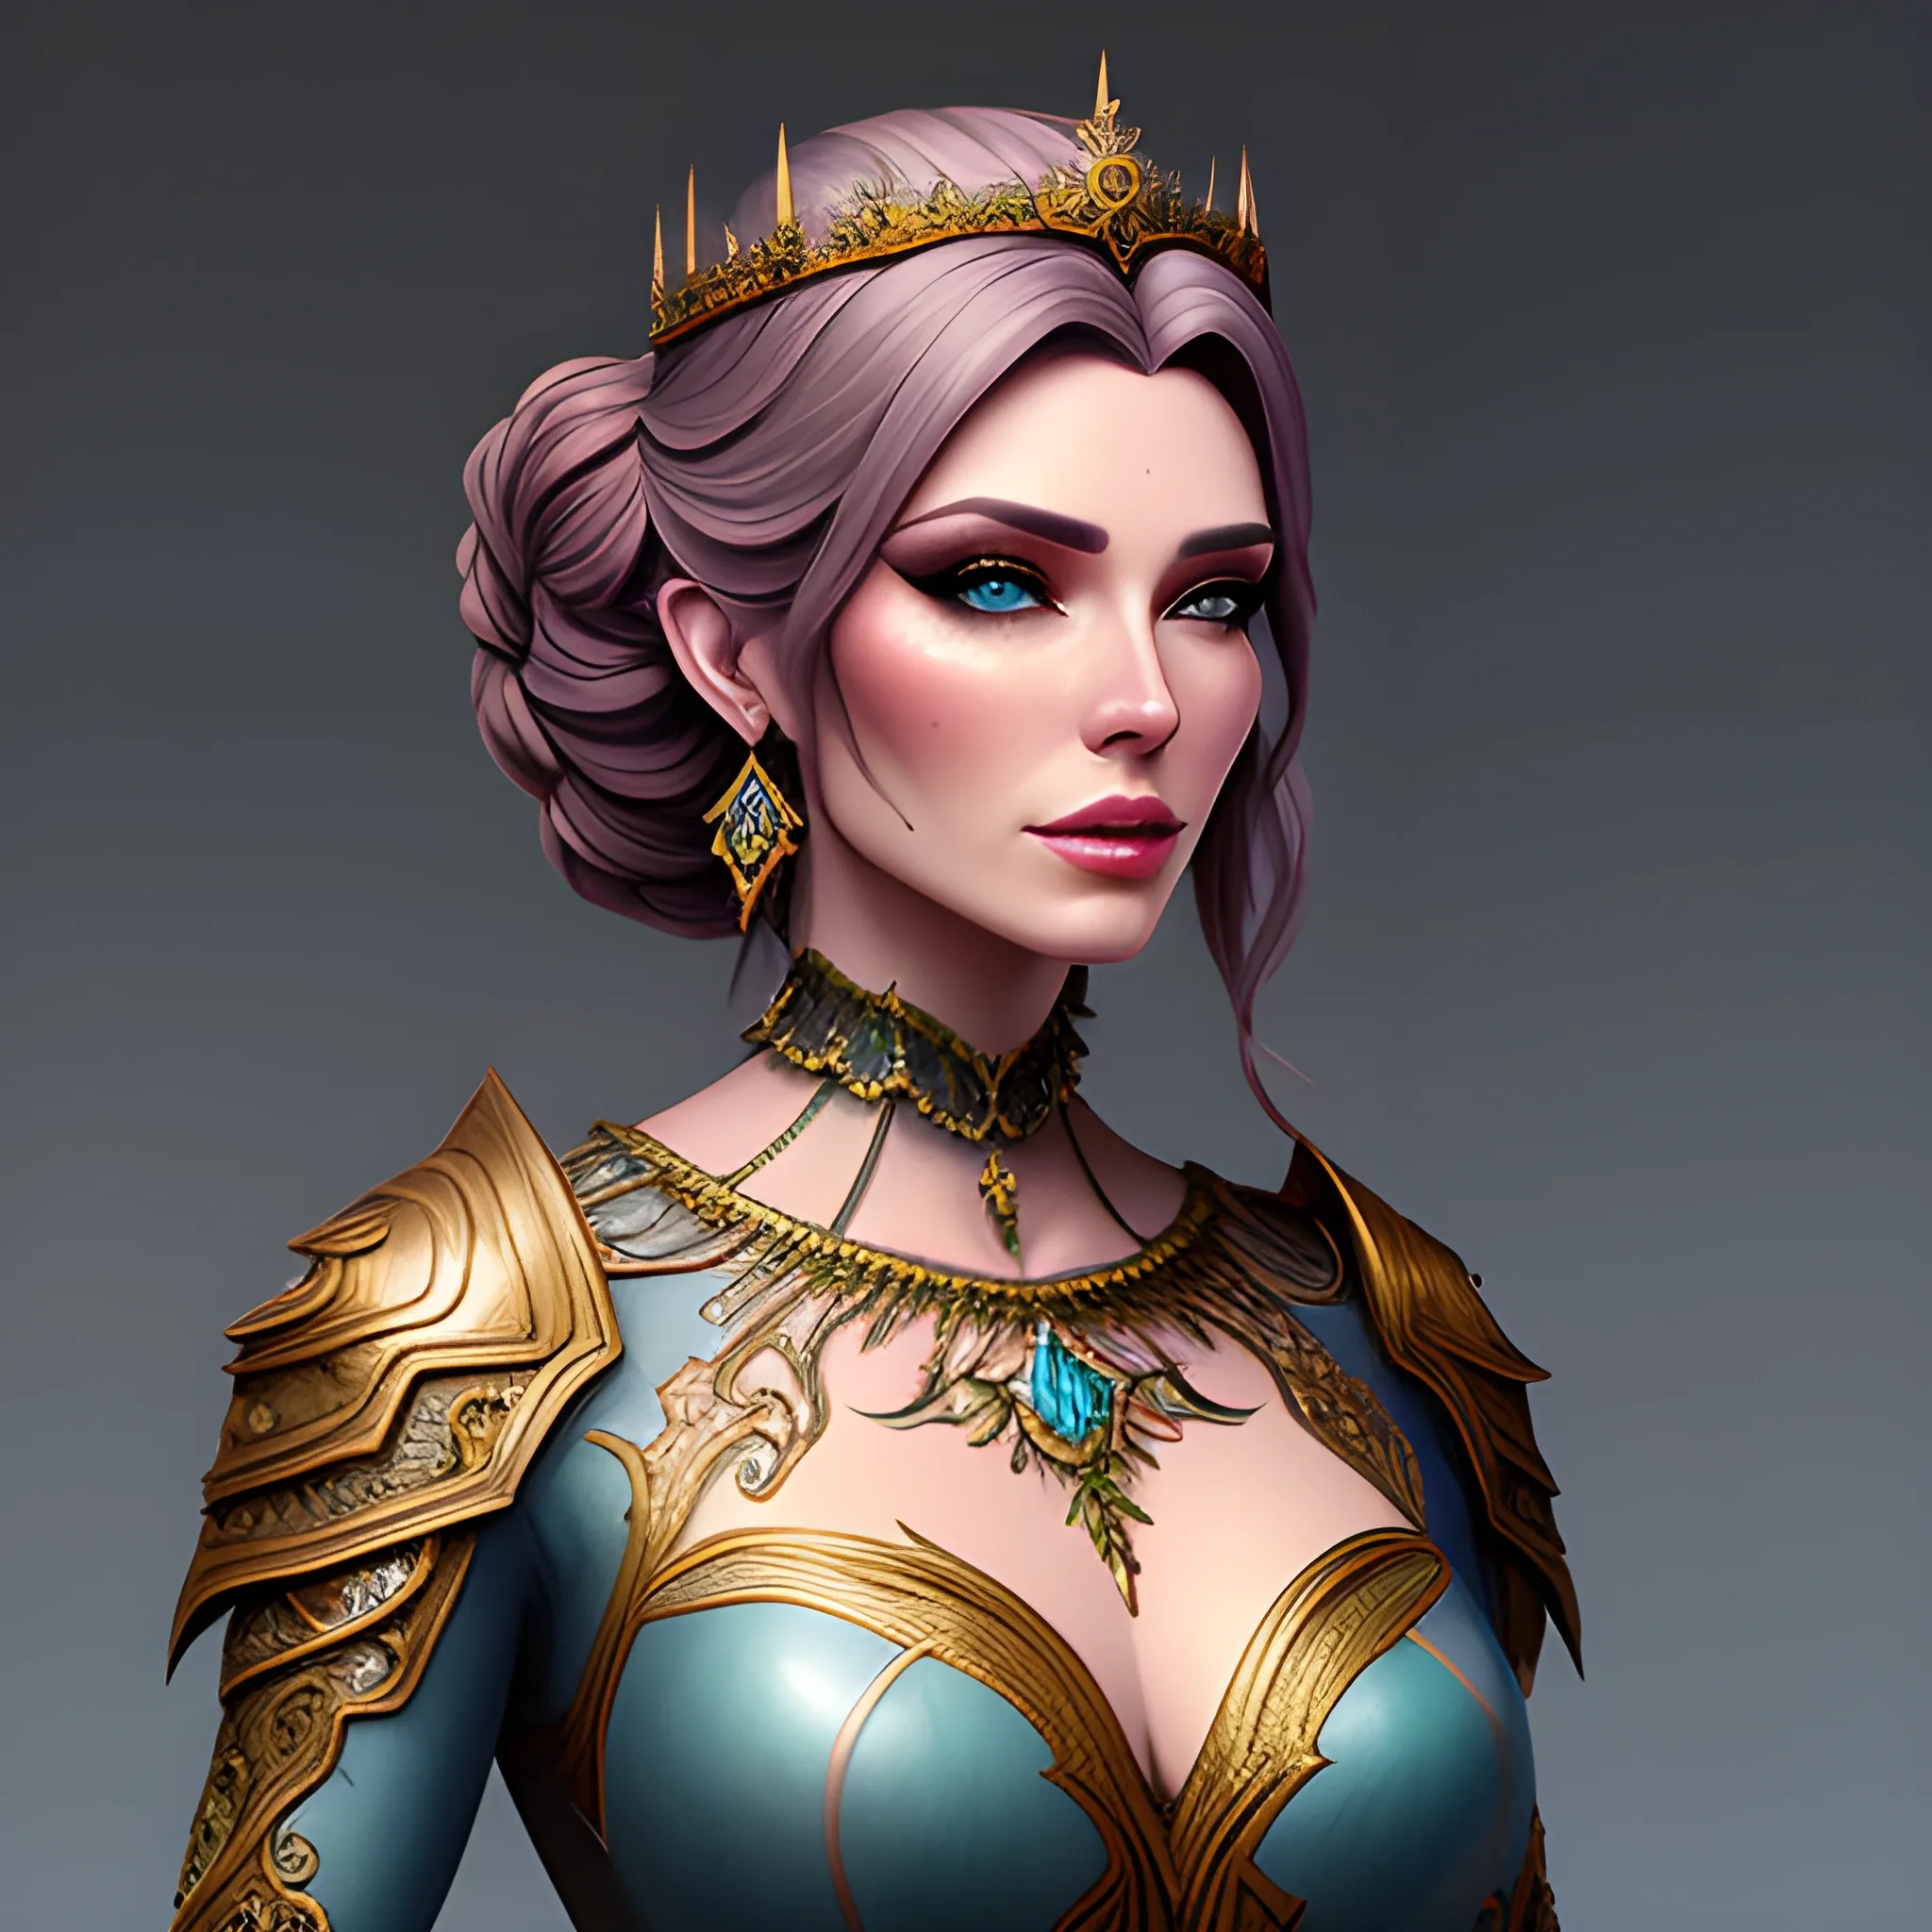 Beautiful girl, concept art, 8k intricate details, fairytale style